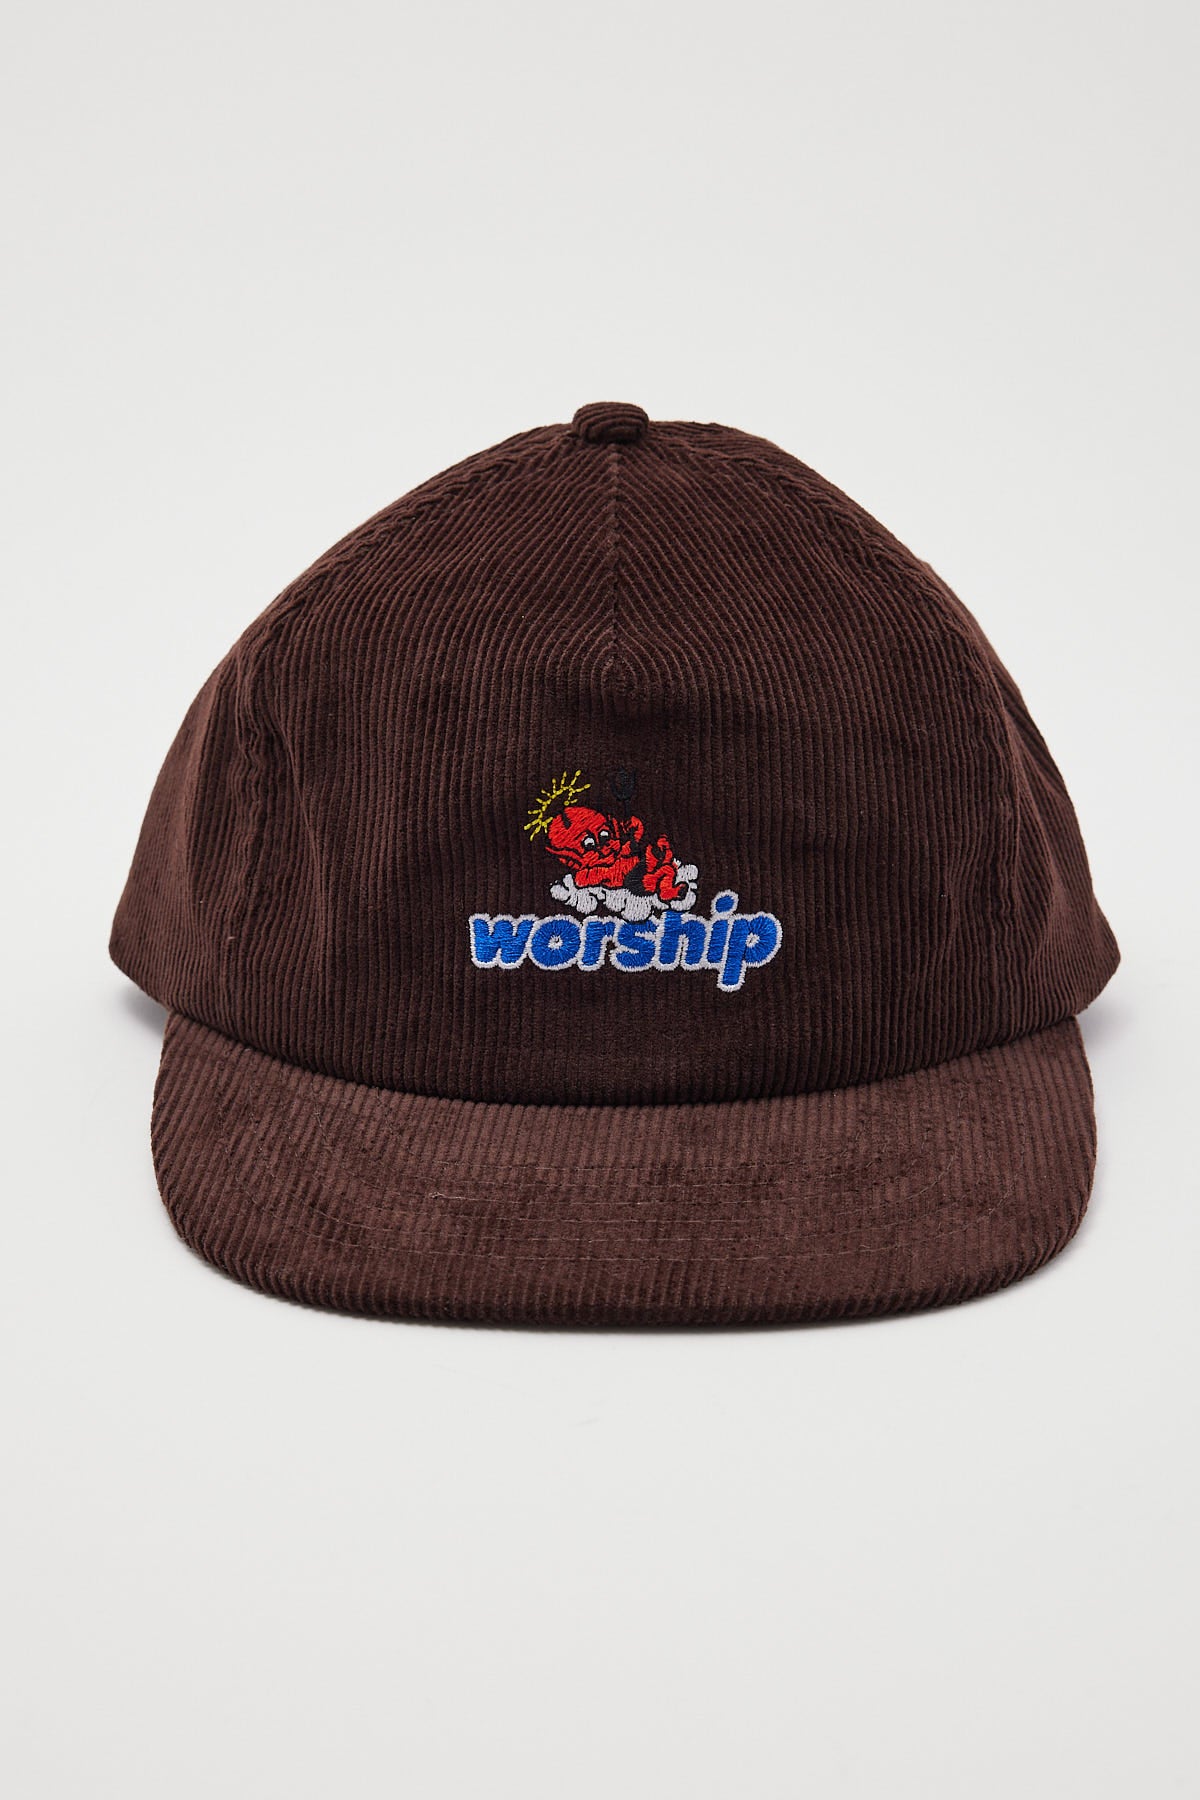 Worship Above The Clouds Hat Fudge